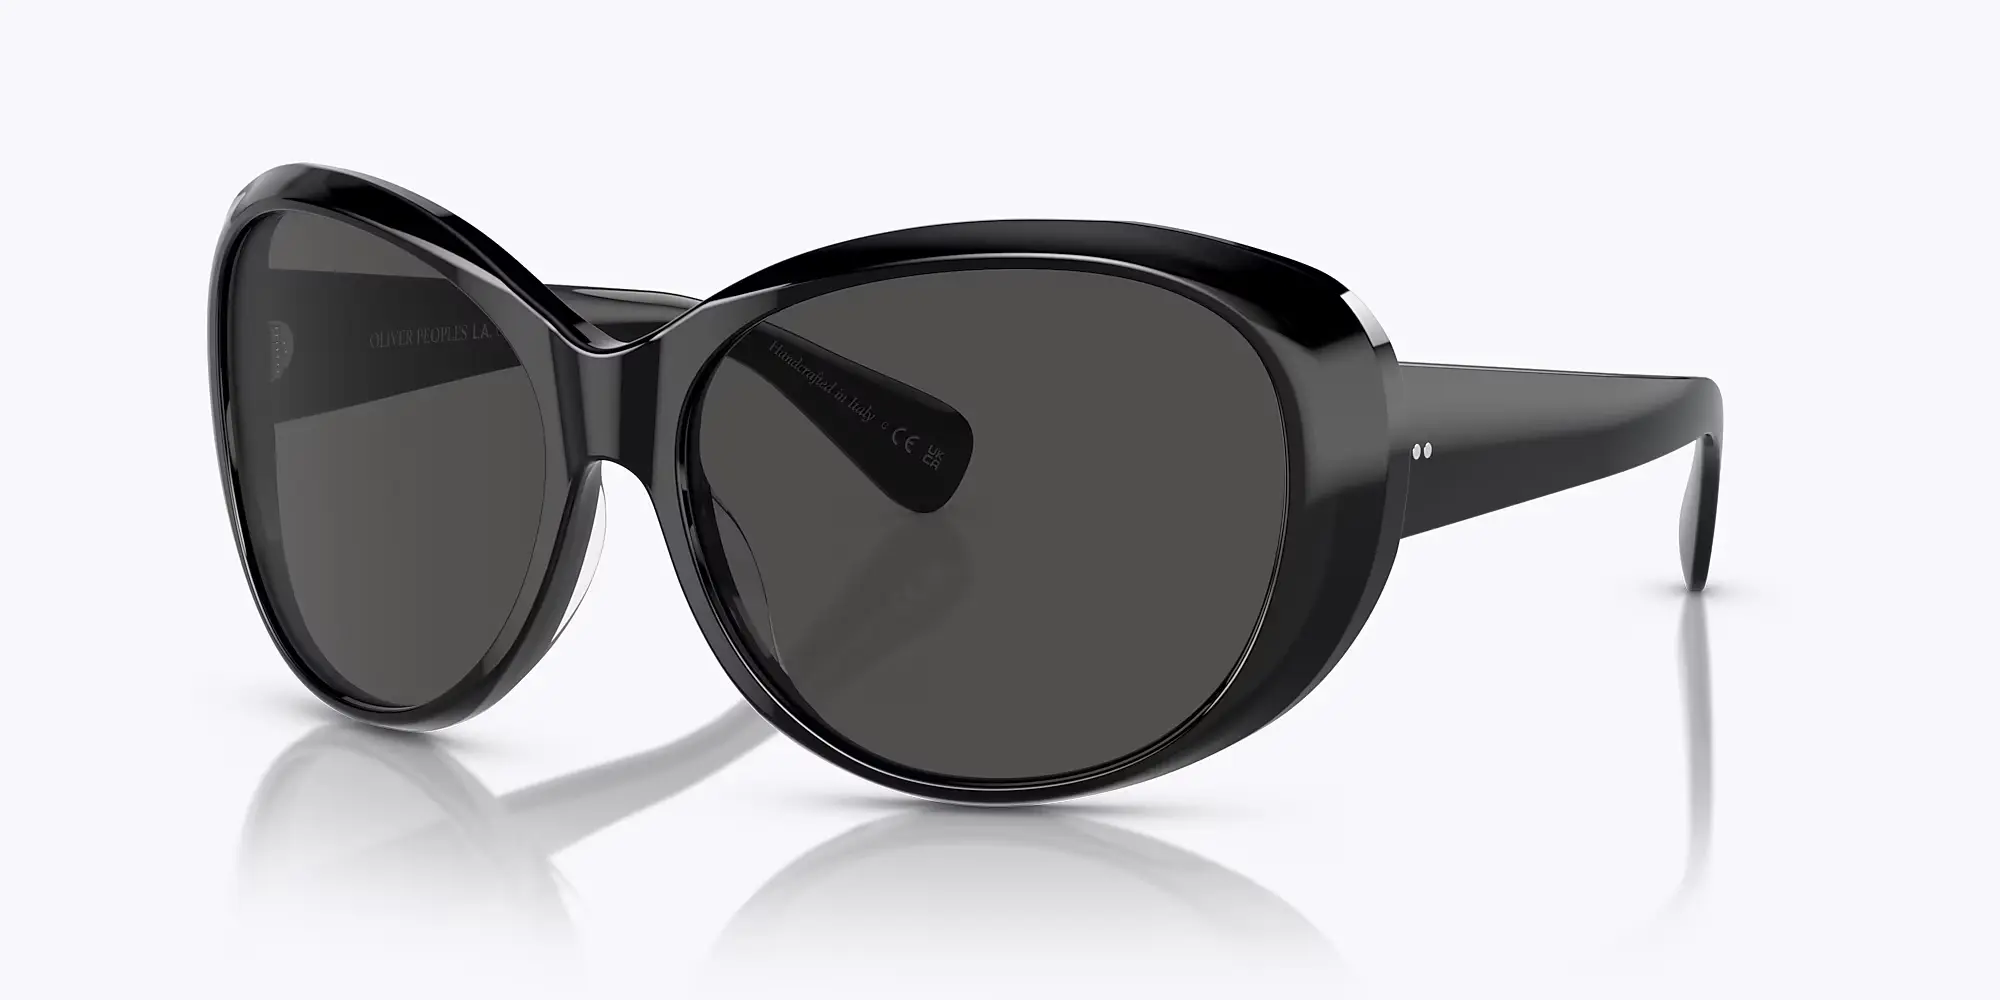 Maridan glasses by Oliver Peoples